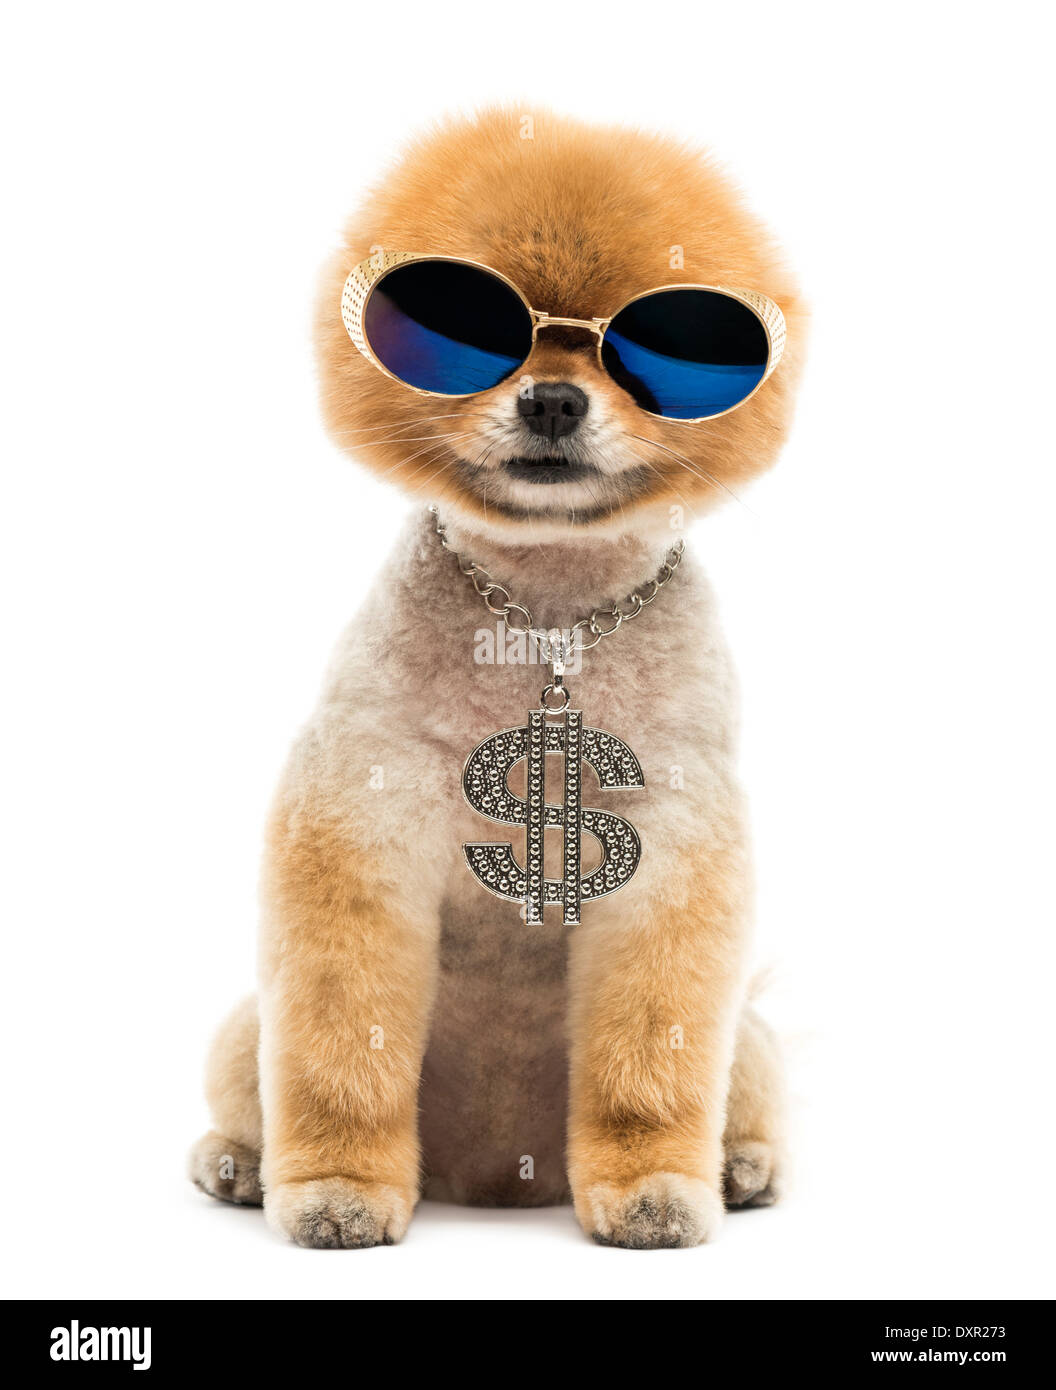 Groomed Pomeranian dog sitting and wearing a dollar necklace and blue sunglasses against white background Stock Photo